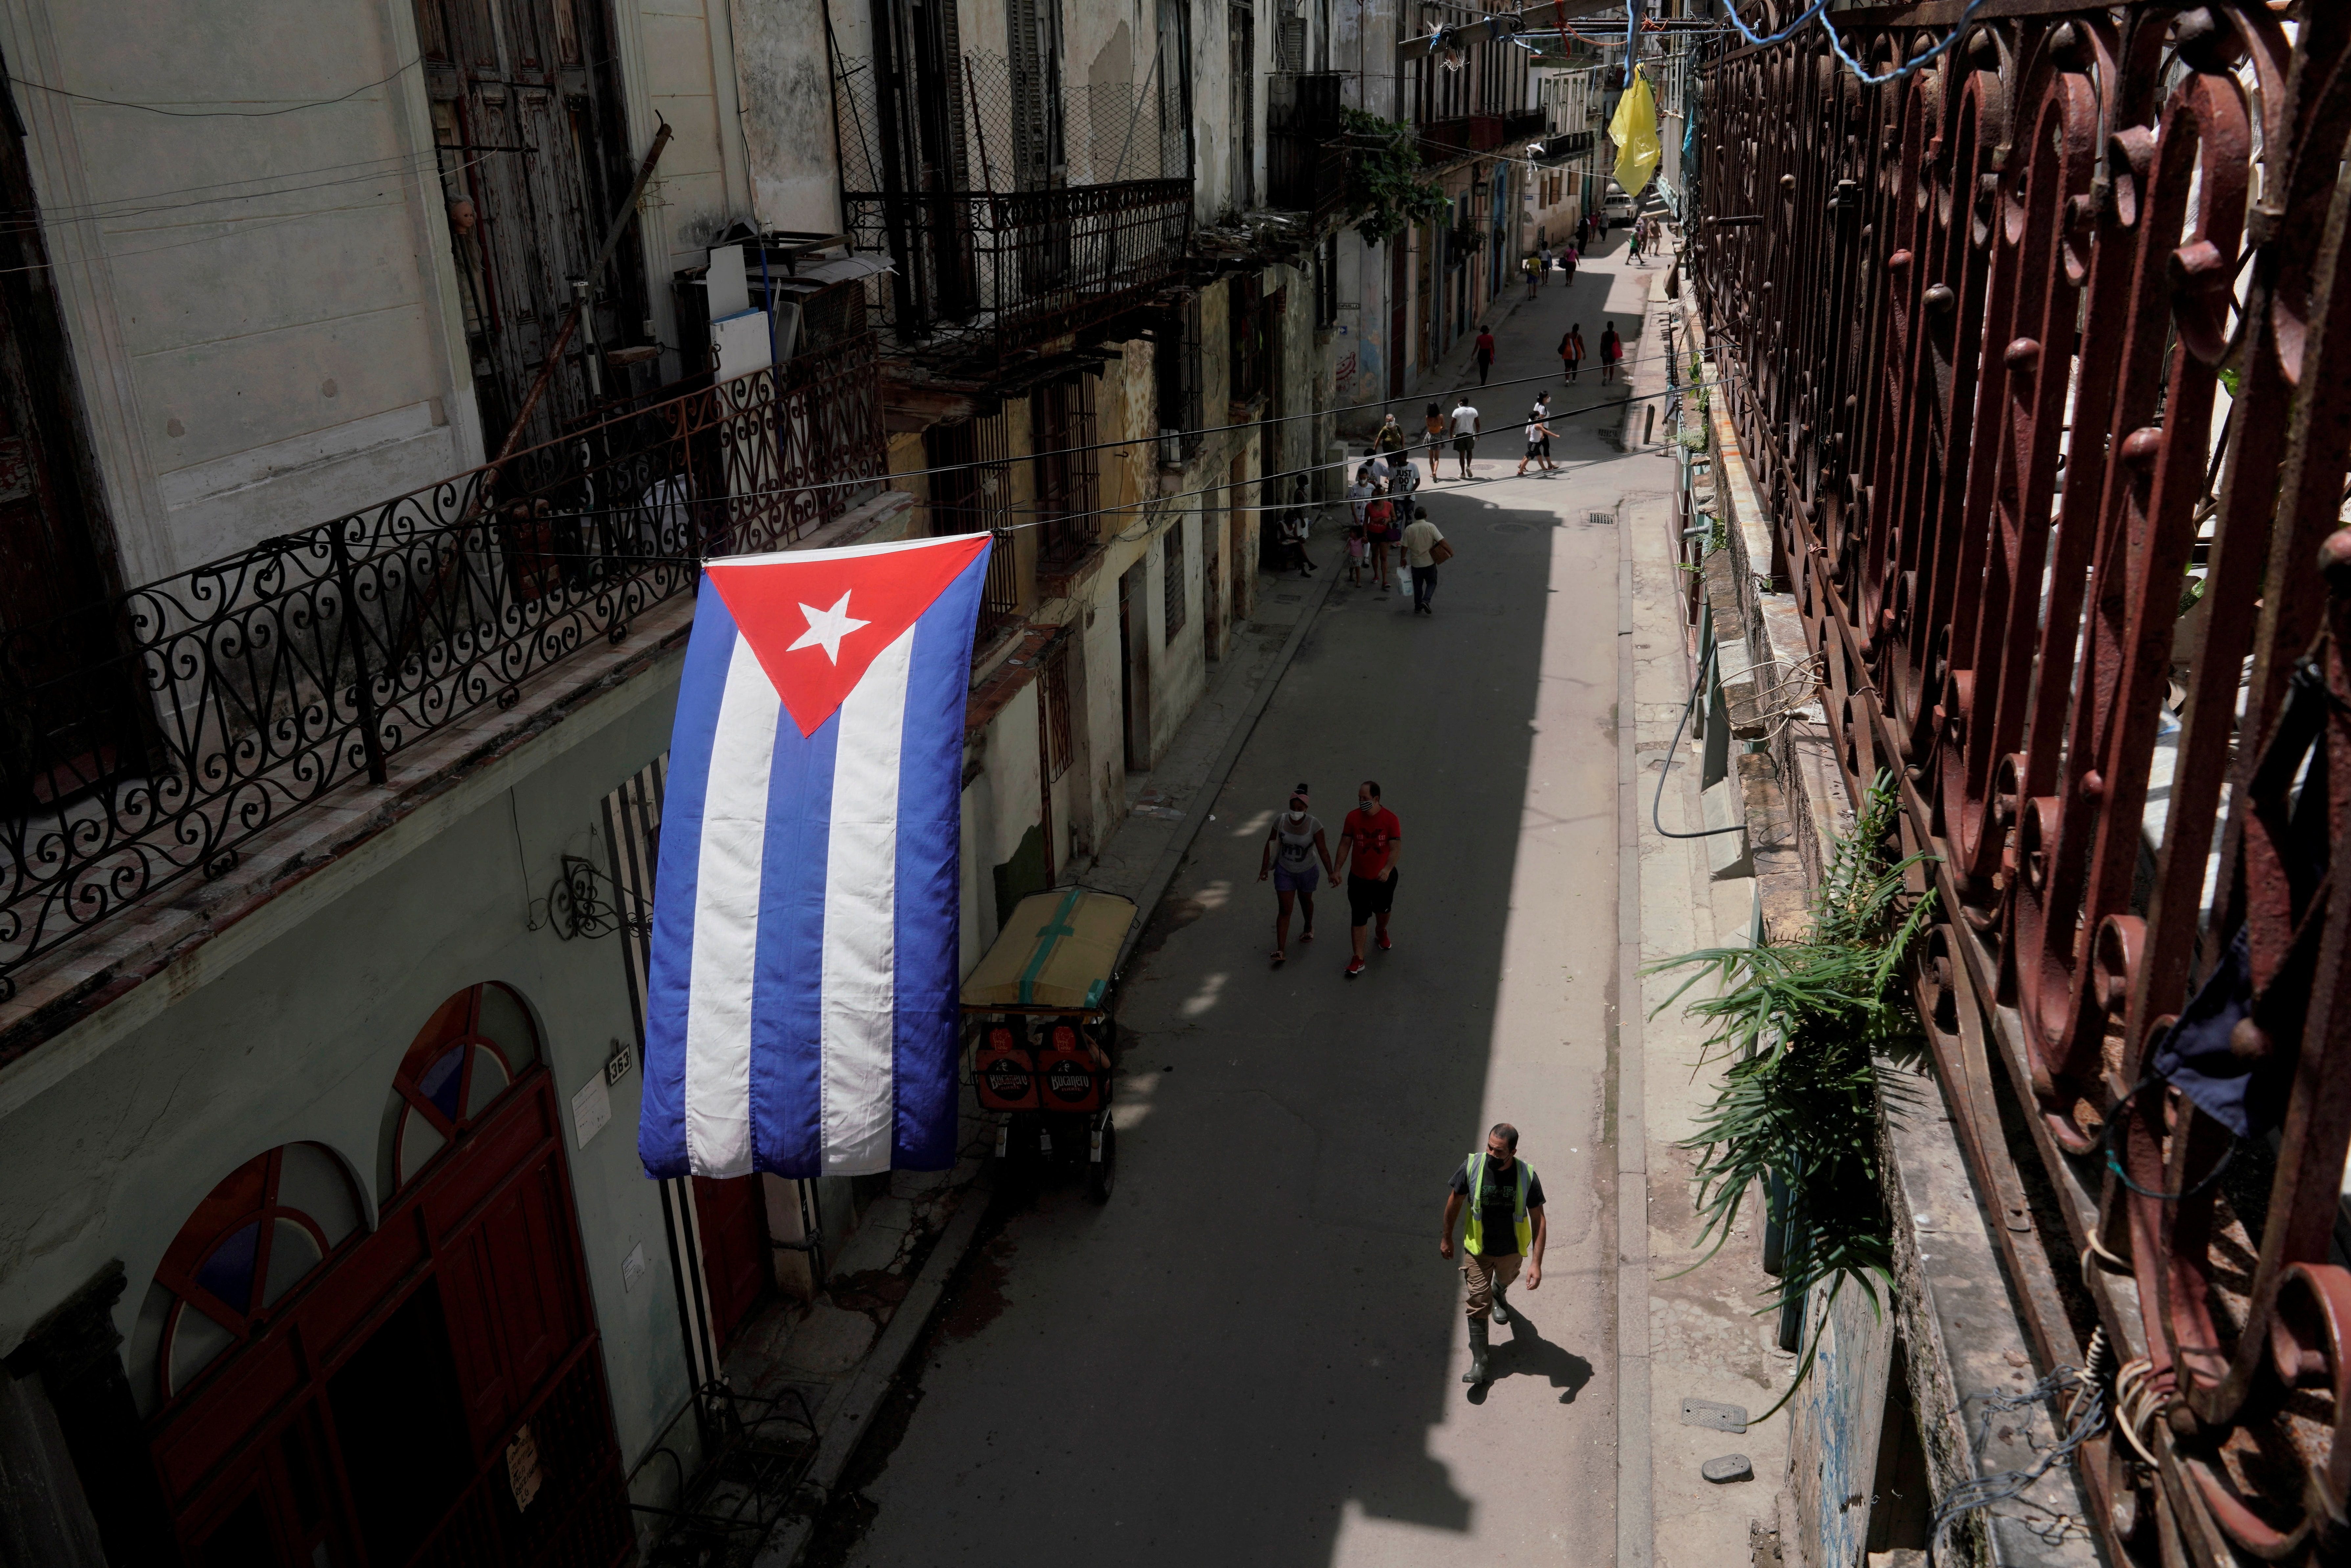 Cuba approves laws granting greater rights as criticism of protesters’ arrests heats up